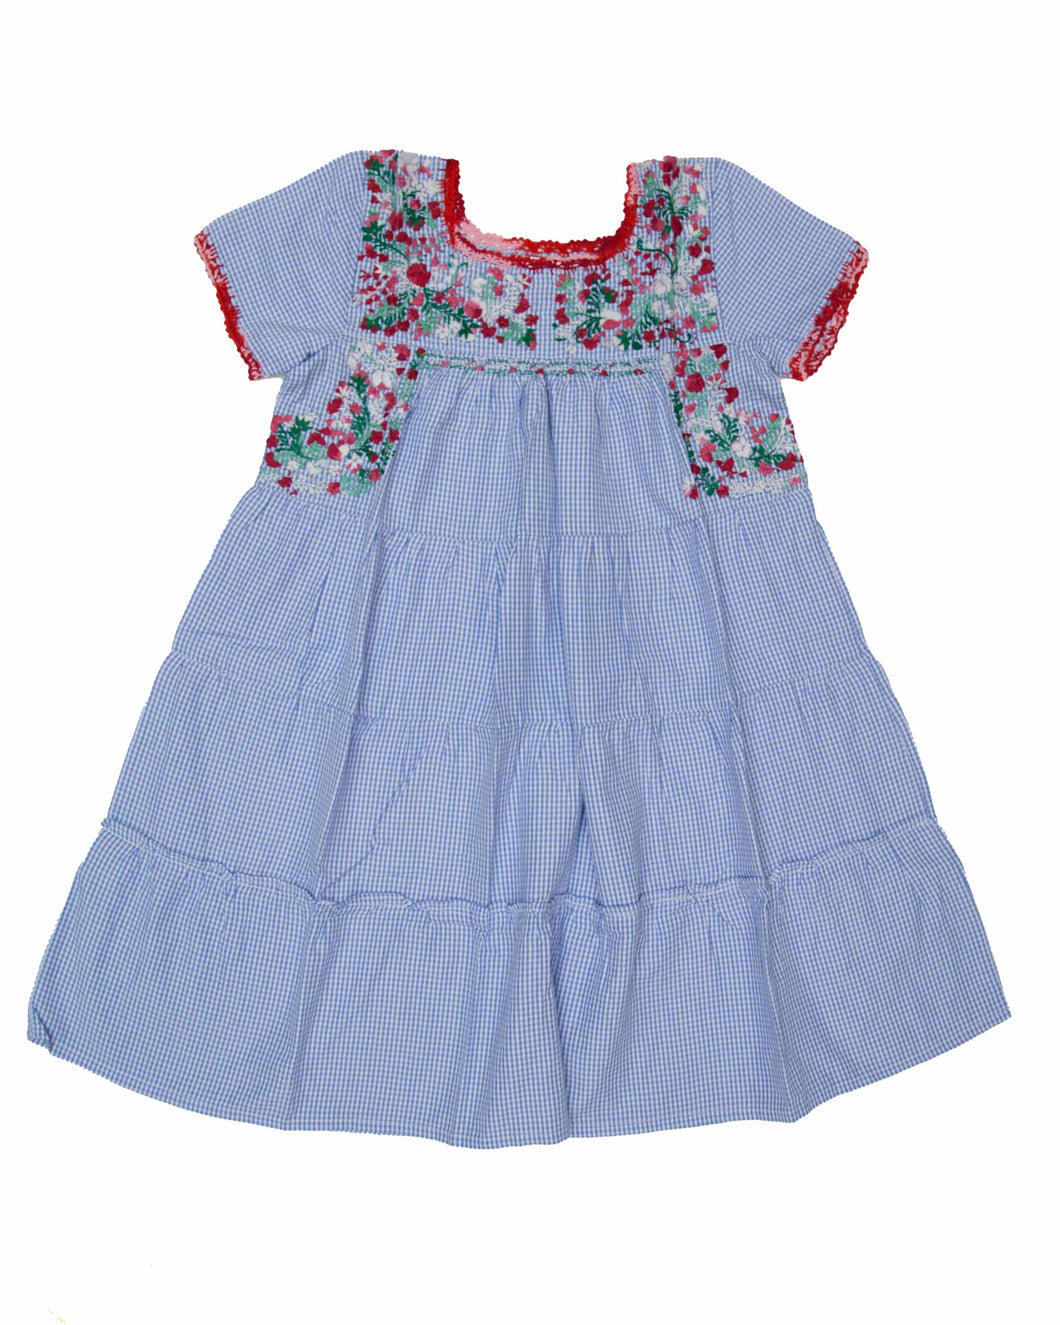 Girls Gabriela Dress | Blue Gingham with Red Ombre